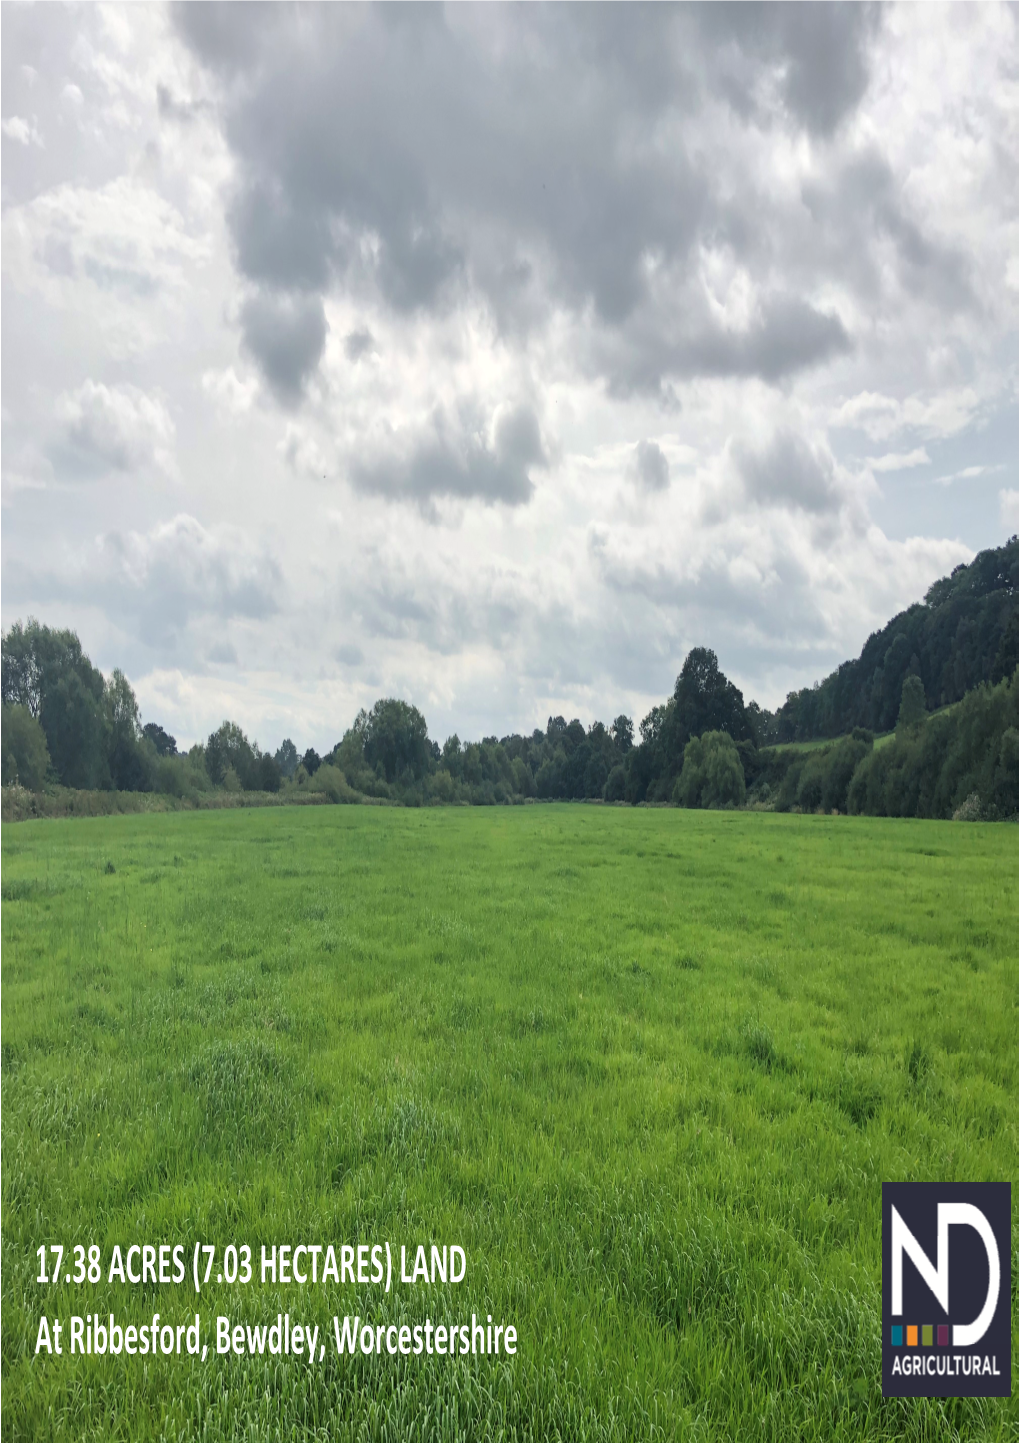 (7.03 HECTARES) LAND at Ribbesford, Bewdley, Worcestershire